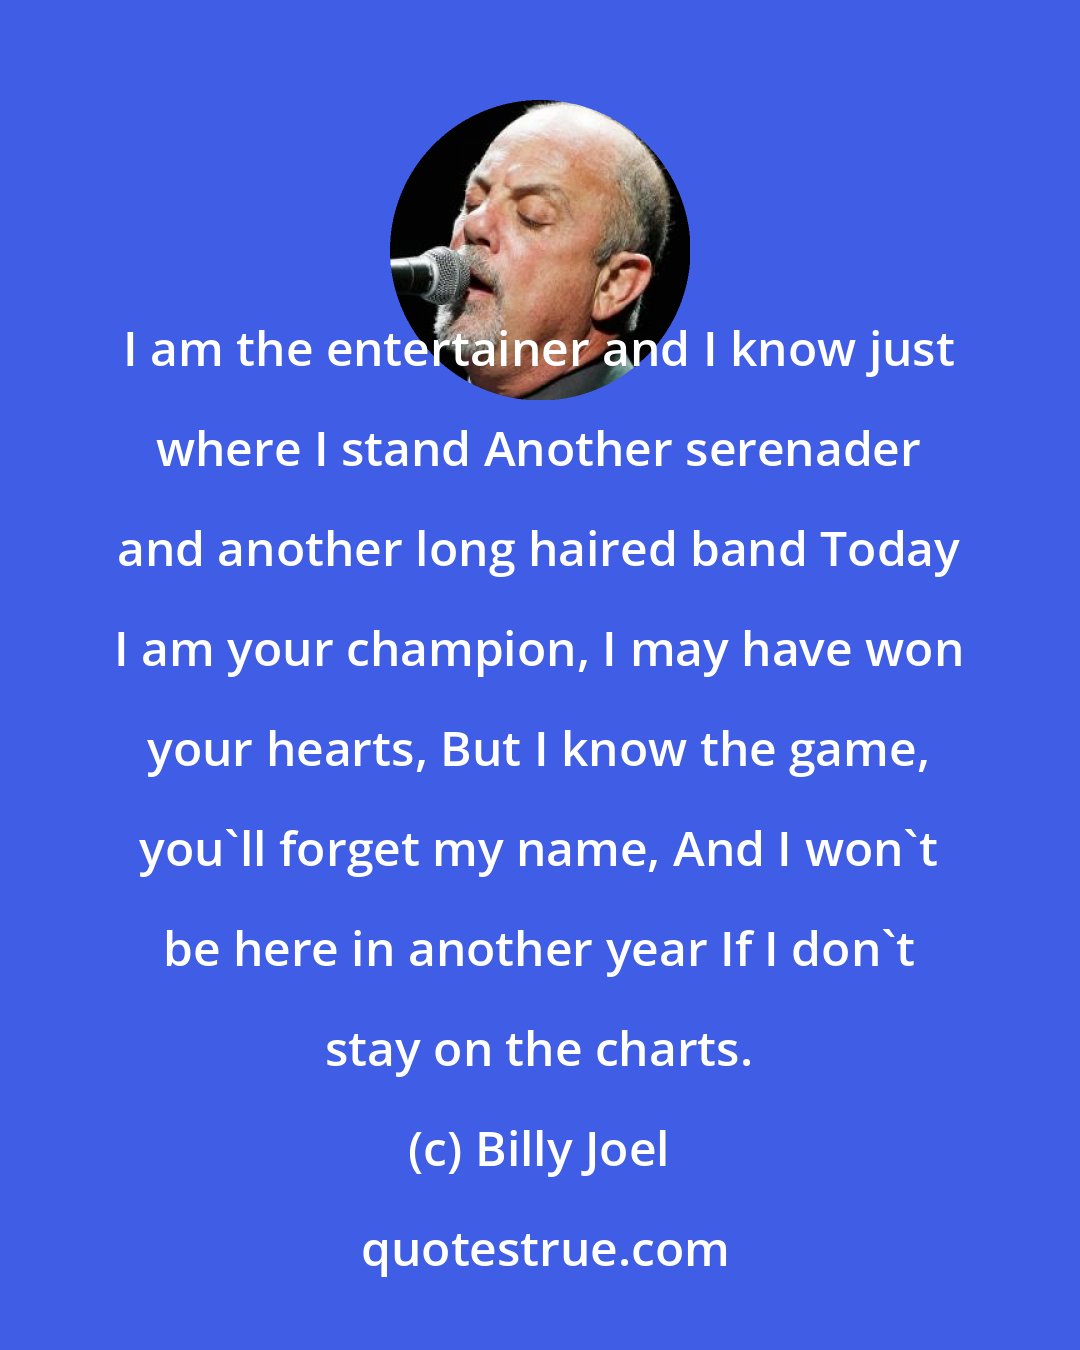 Billy Joel: I am the entertainer and I know just where I stand Another serenader and another long haired band Today I am your champion, I may have won your hearts, But I know the game, you'll forget my name, And I won't be here in another year If I don't stay on the charts.